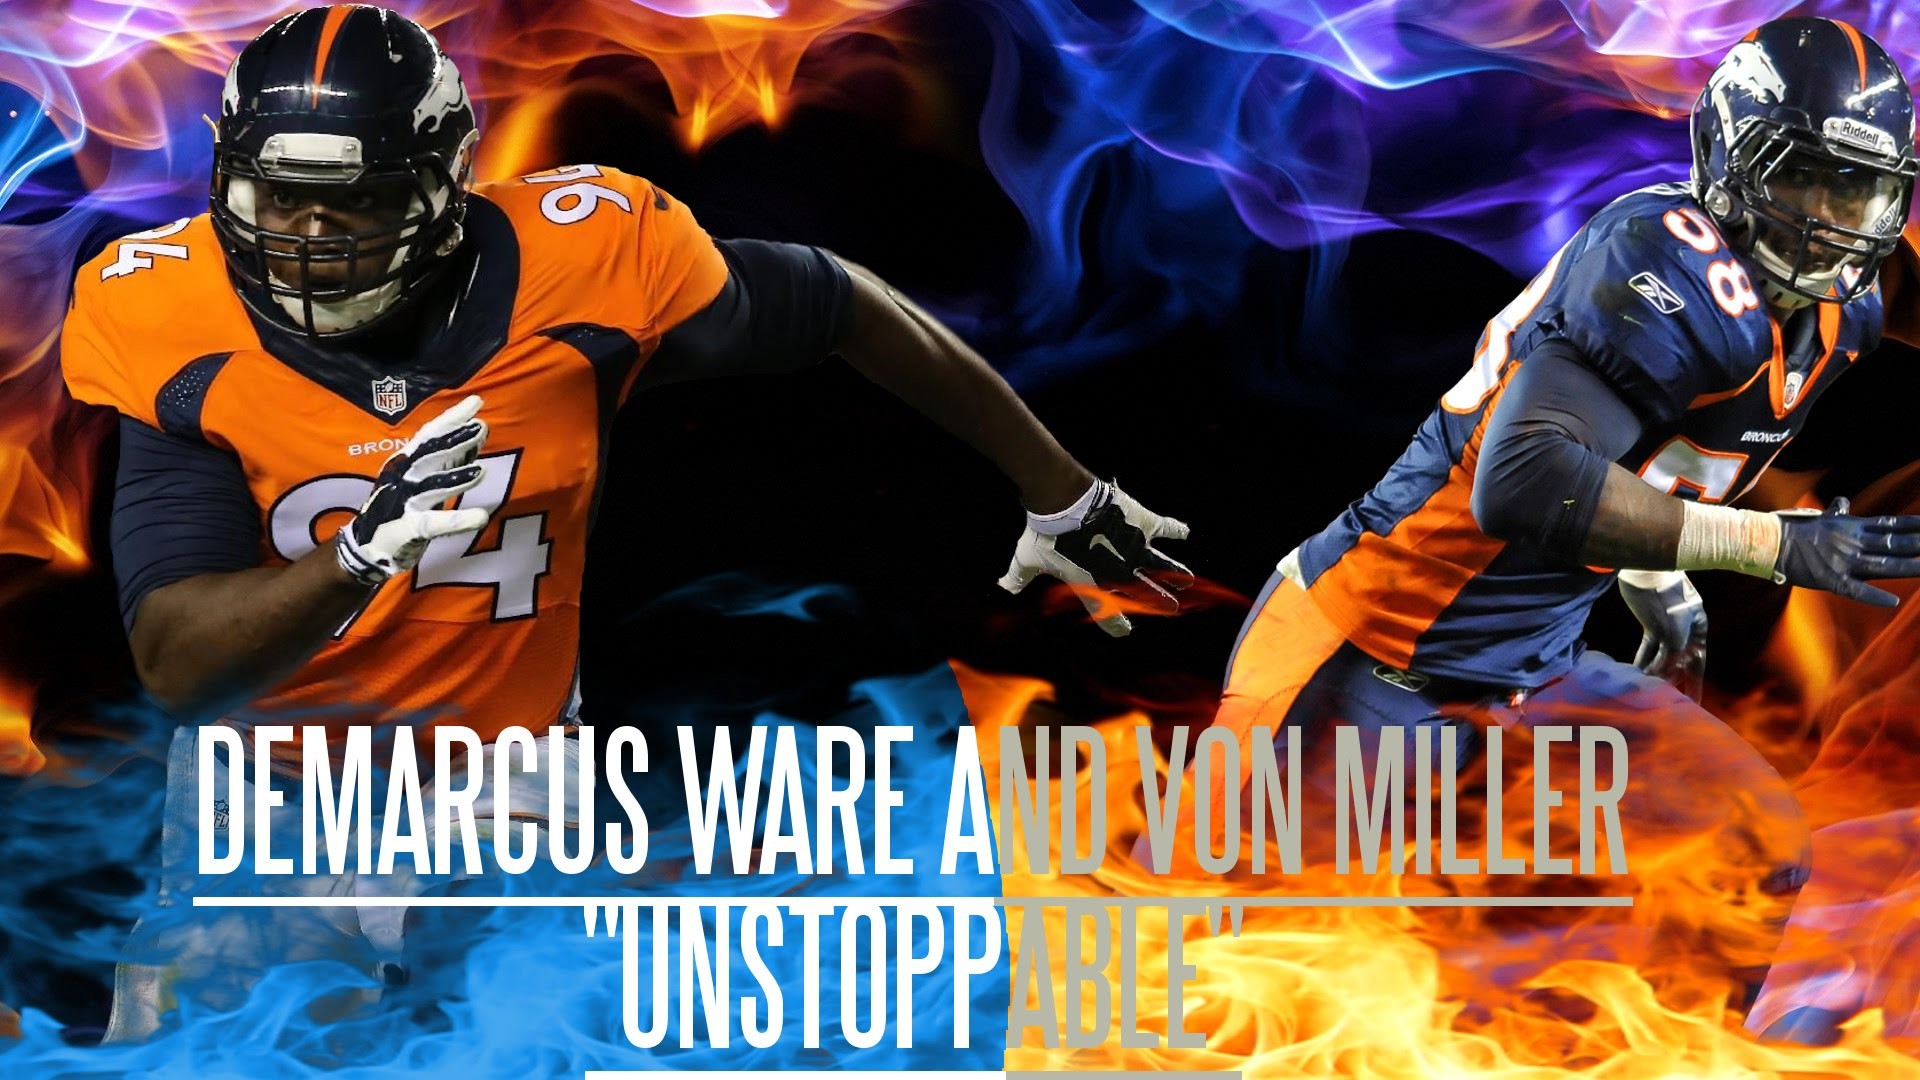 1920x1080 Von Miller and Demarcus Ware Highlights "Unstoppable"